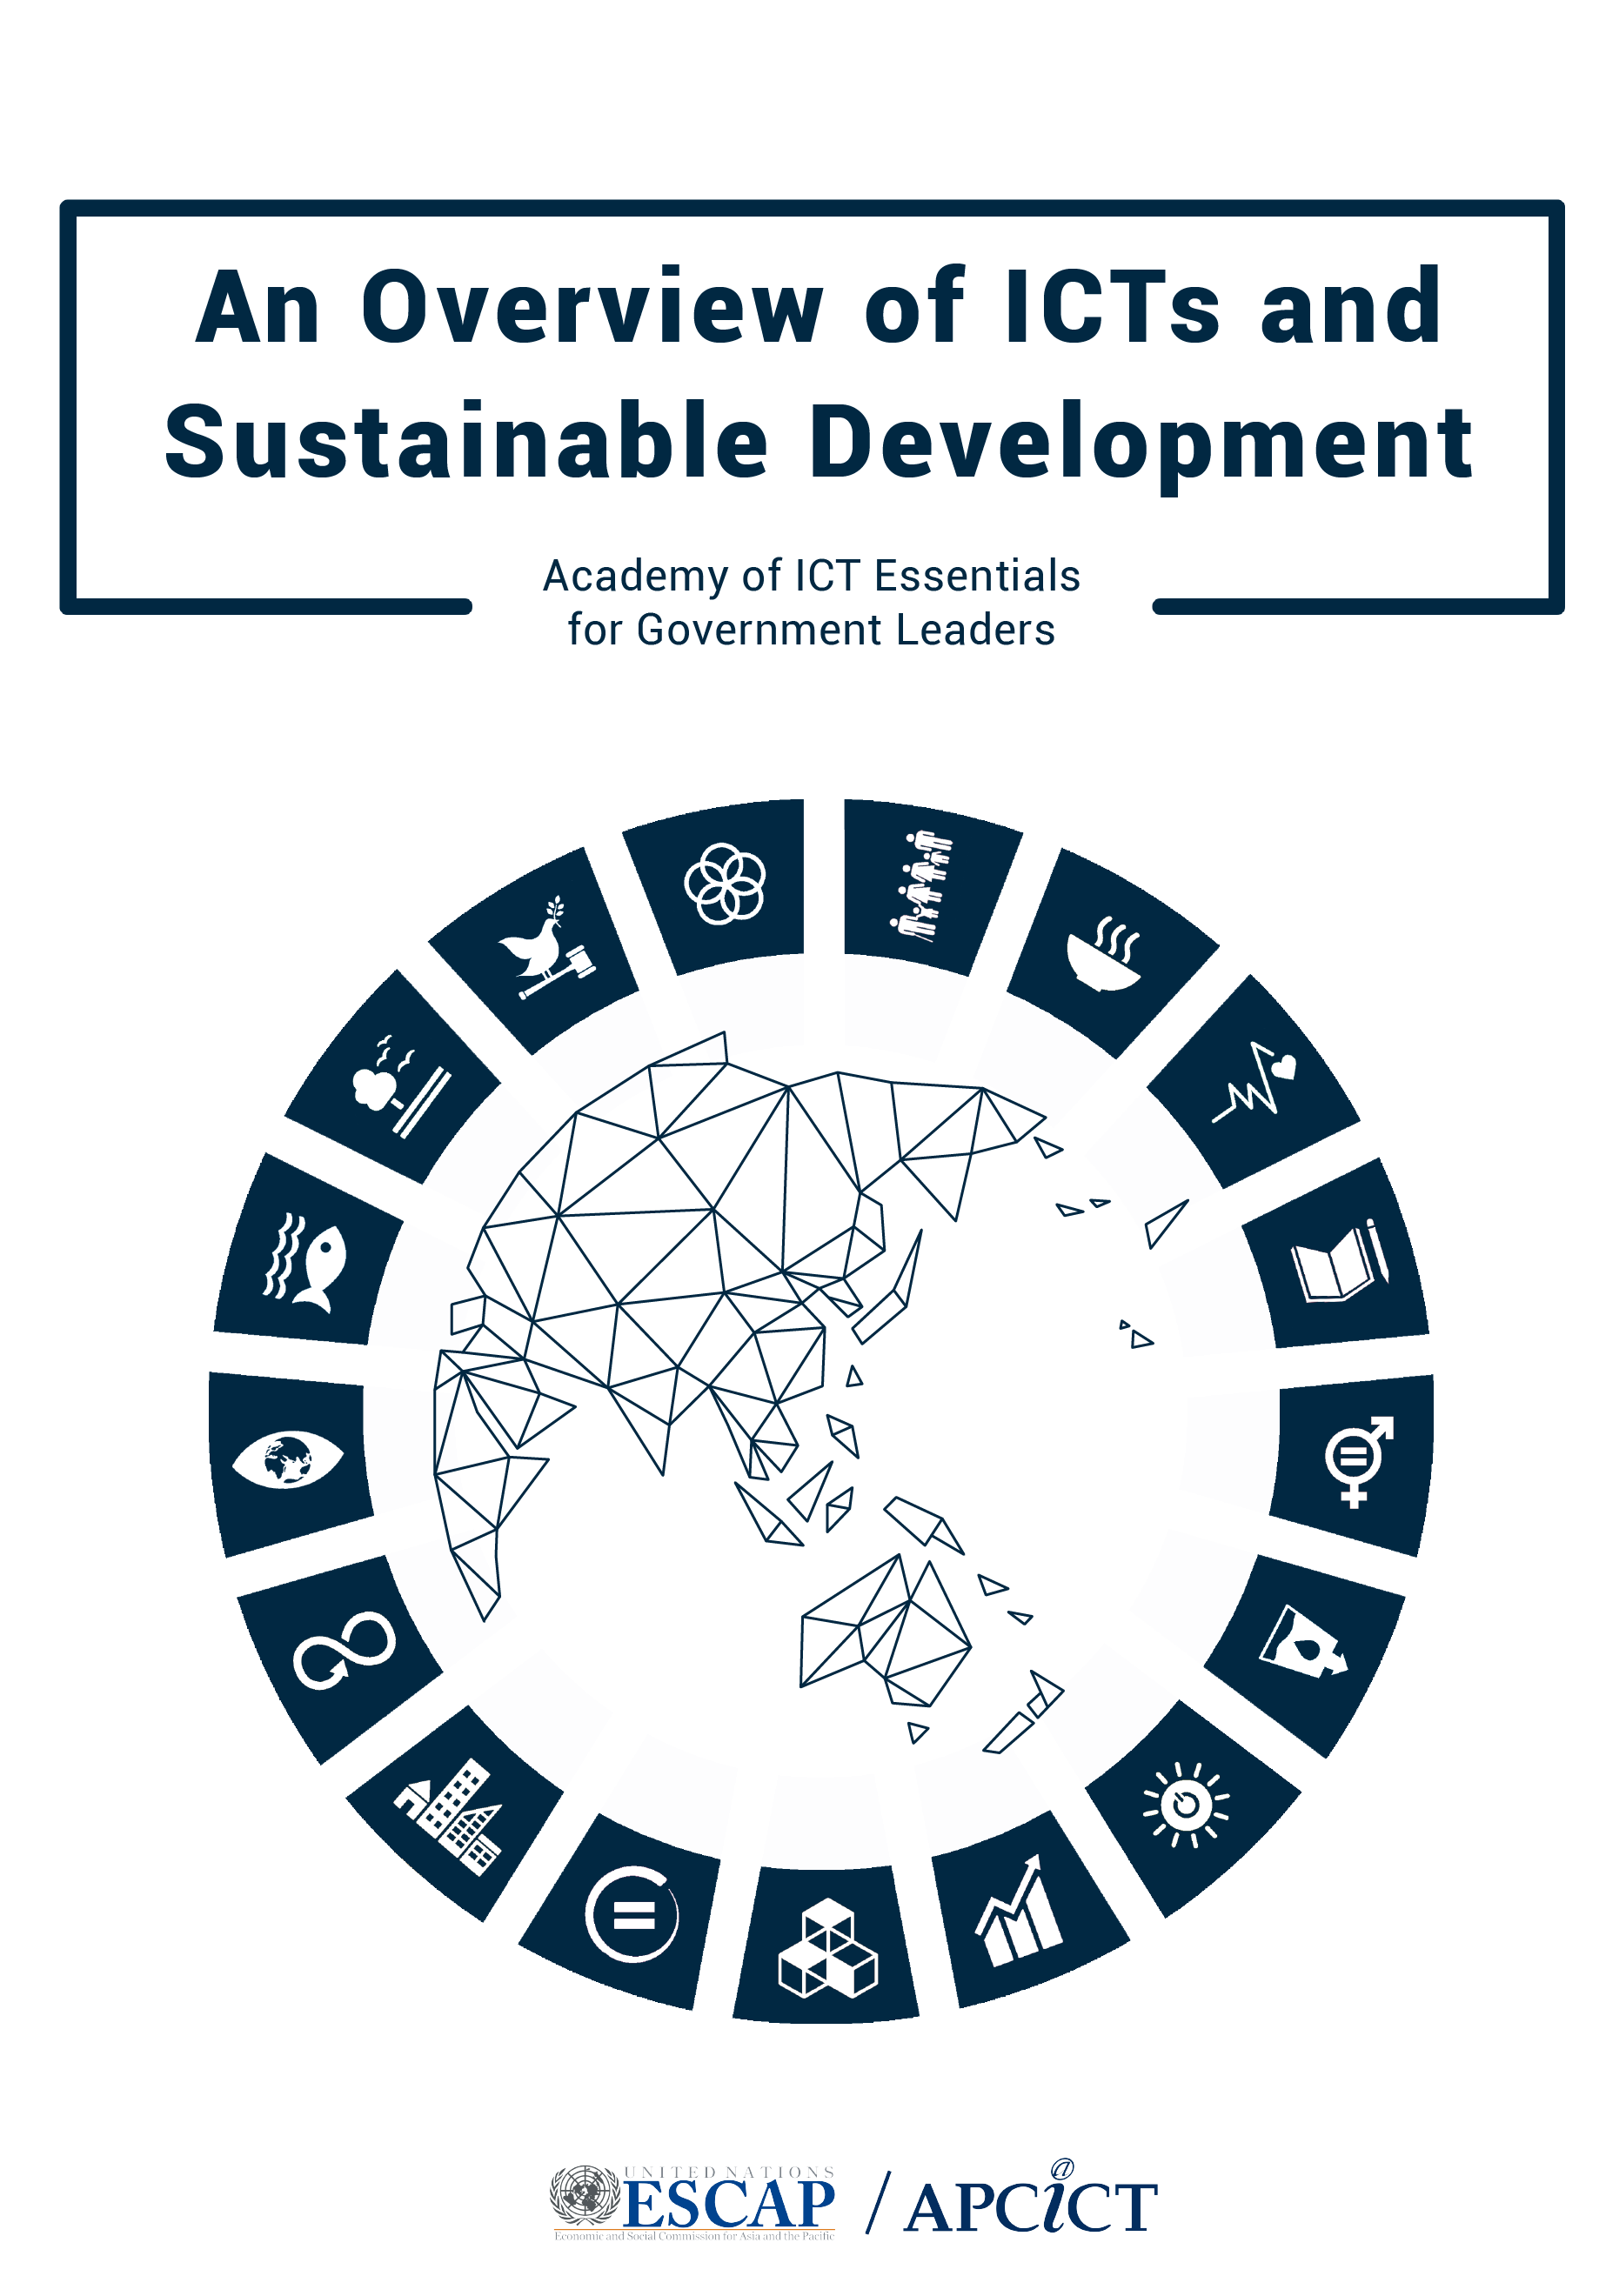 Overview of ICT and Sustainable Development